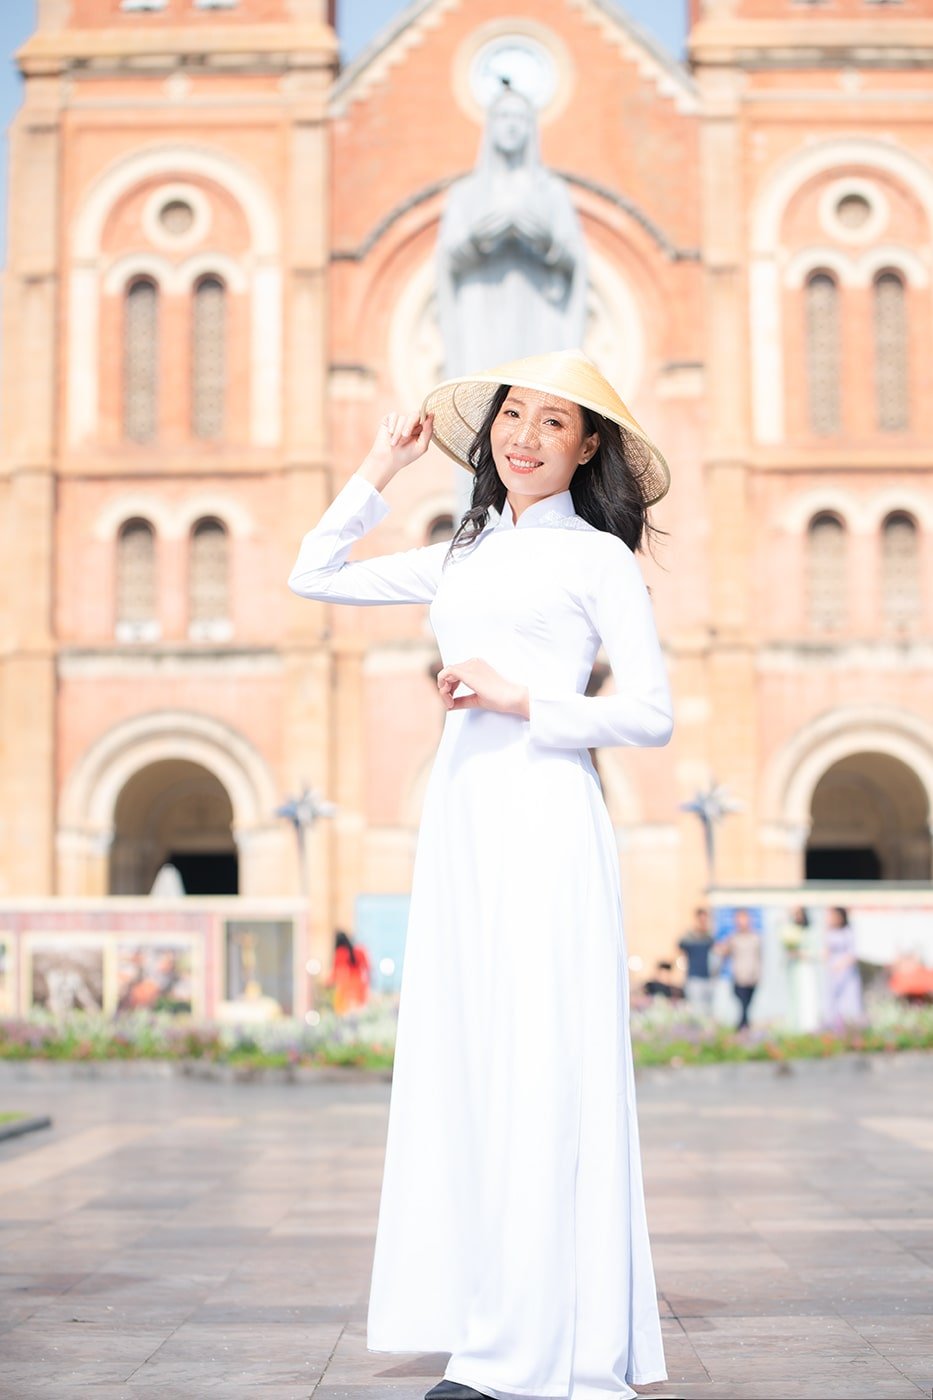 Being booed for wearing a skirt showing off her back in front of the Cathedral, Phuong Trinh had to speak out - 9